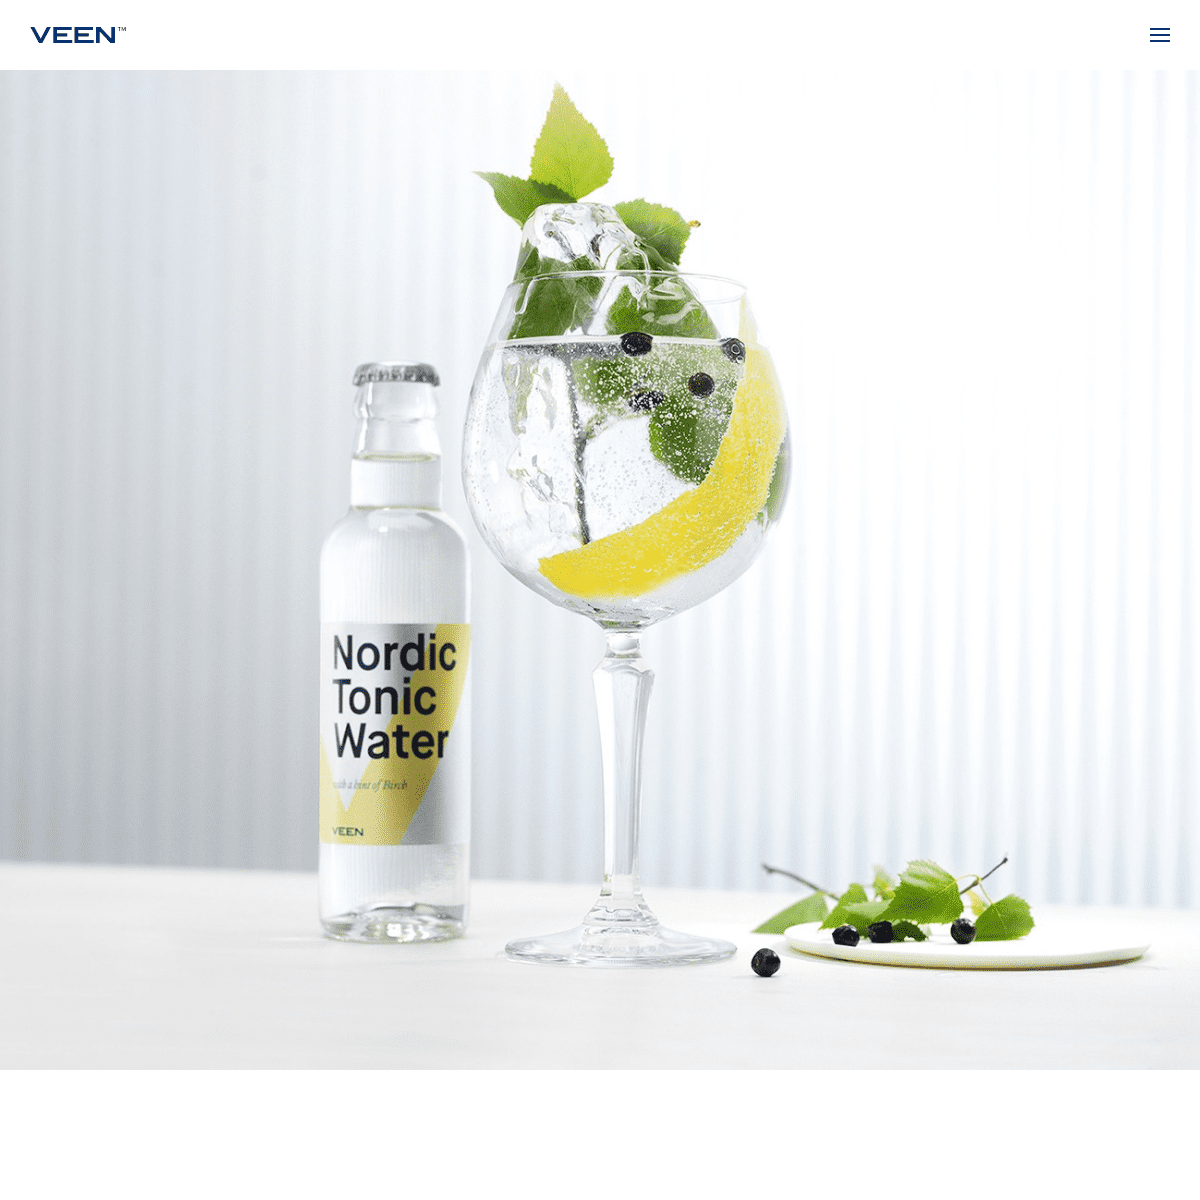 VEEN Nordic Mixers - The smoothest water in the world with a hint of Nordic nature